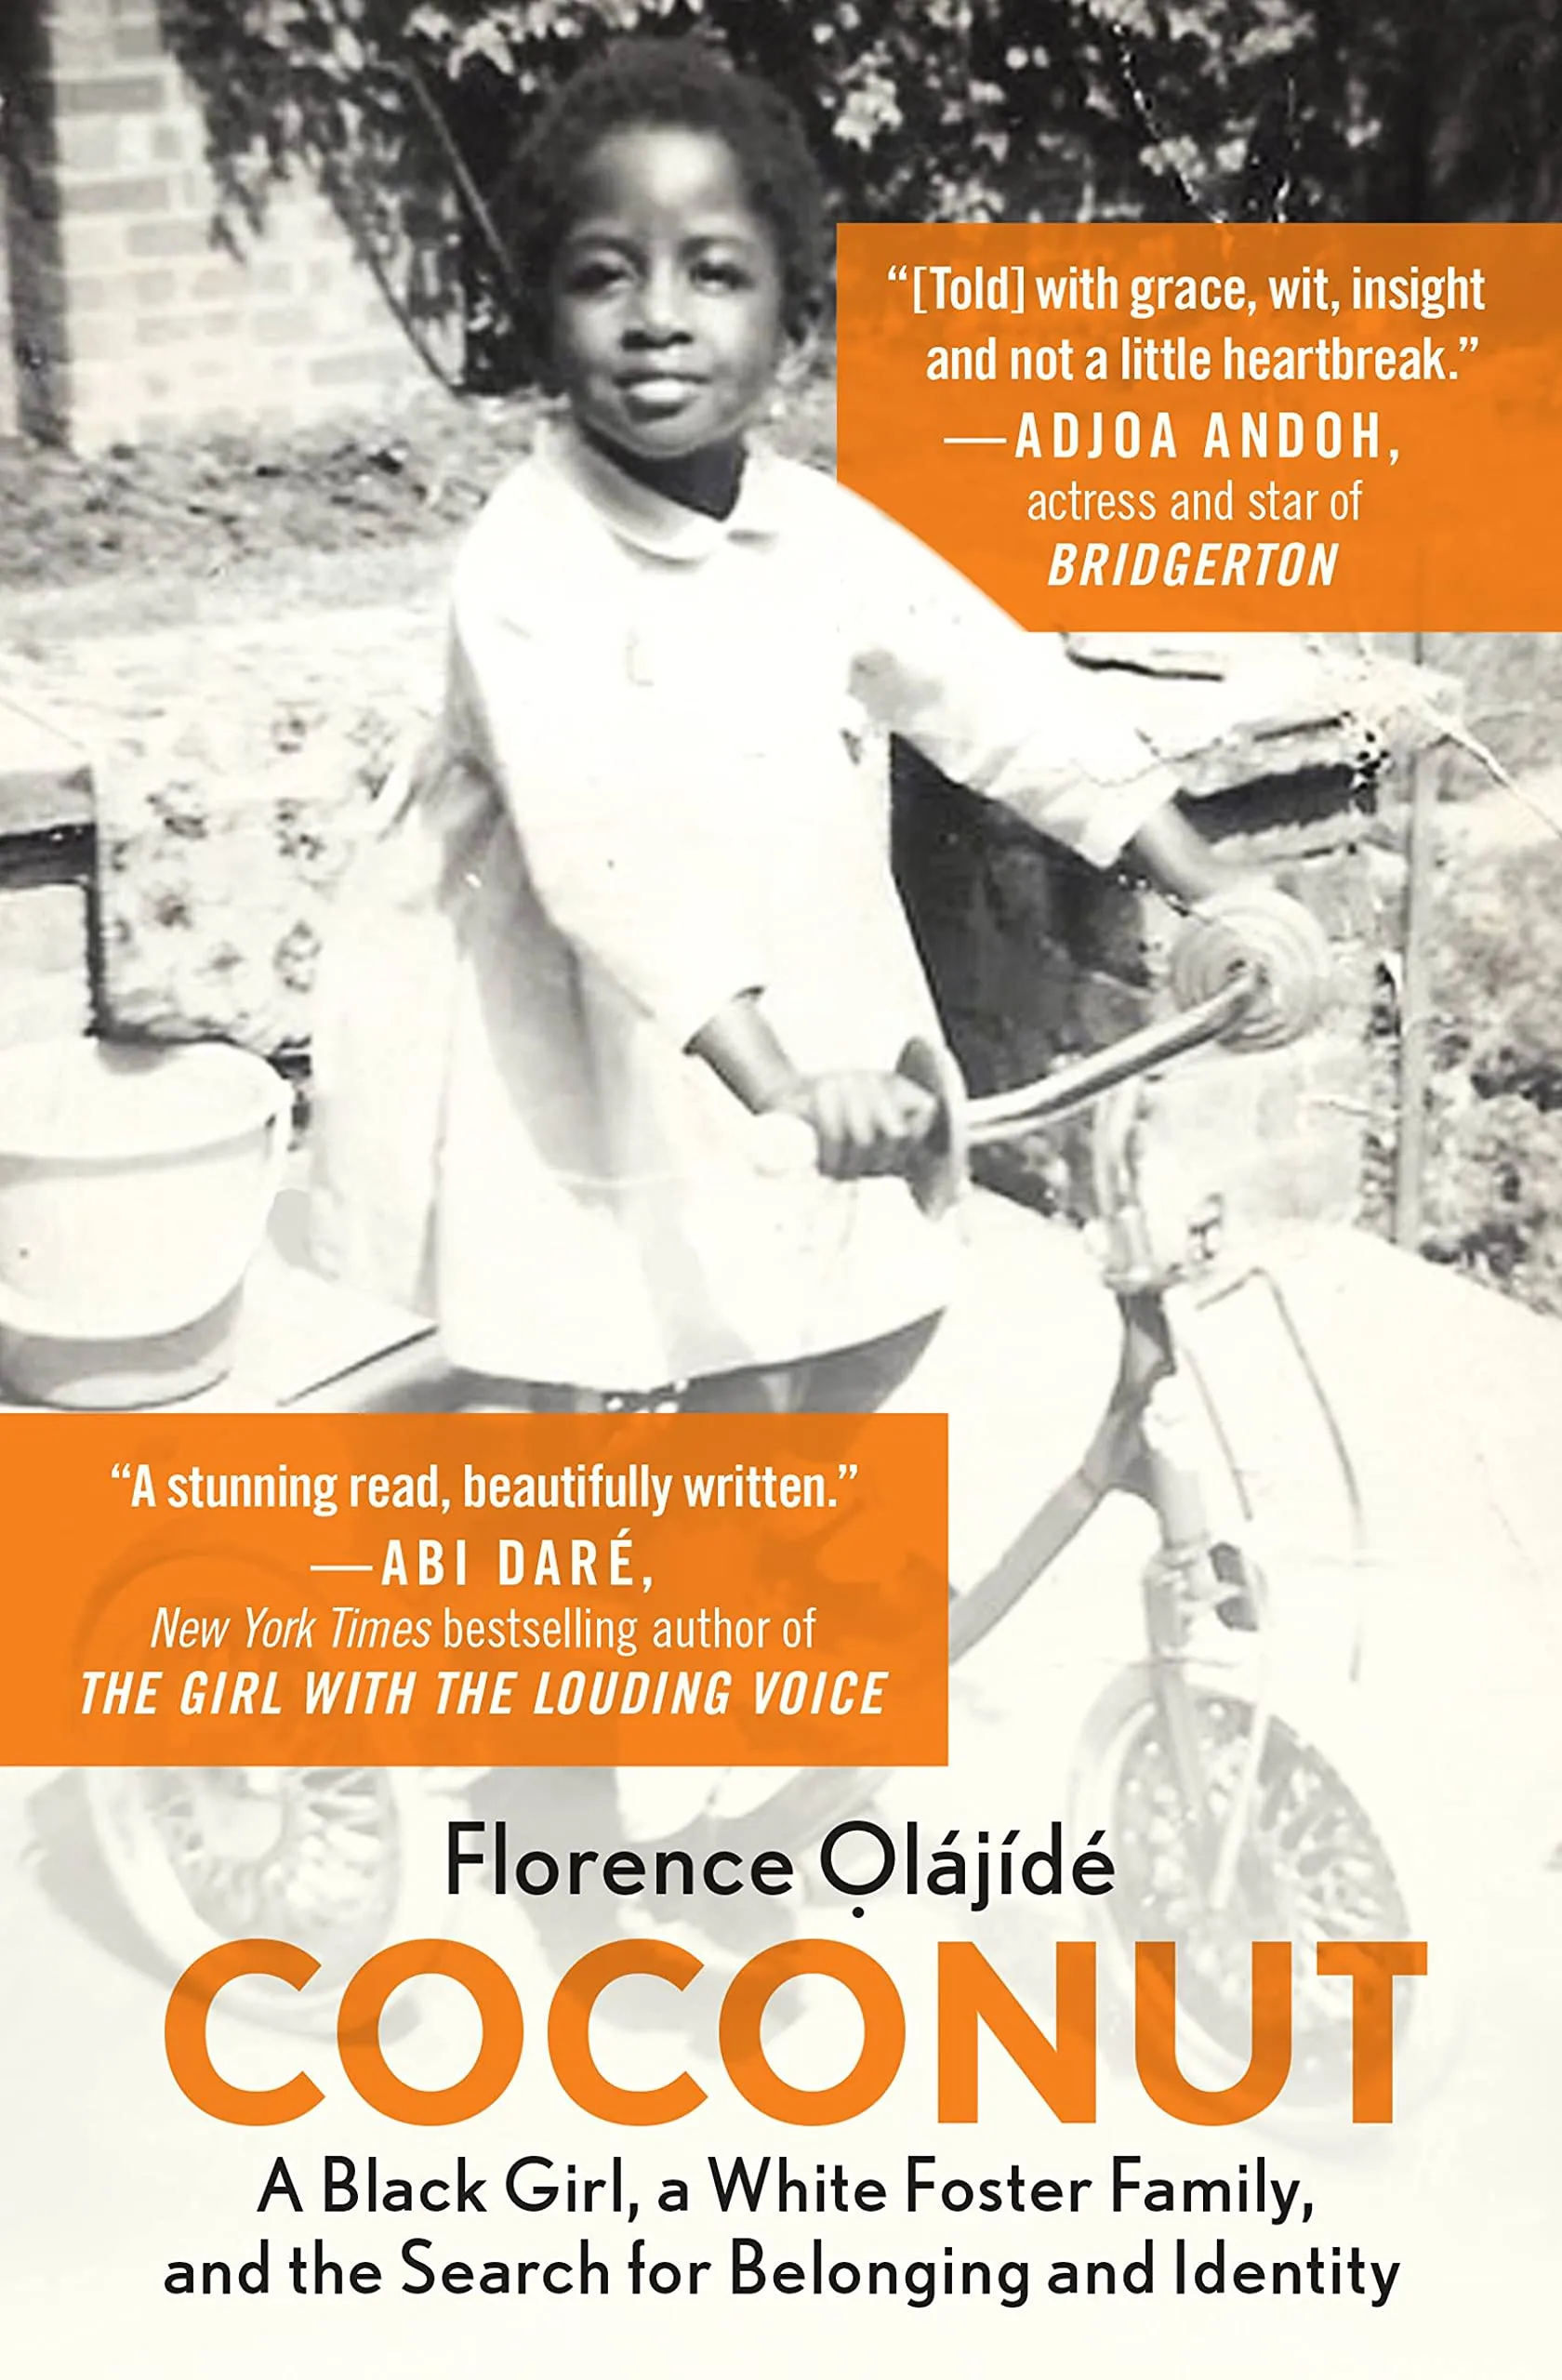 Book cover of Coconut by Florence Olajide